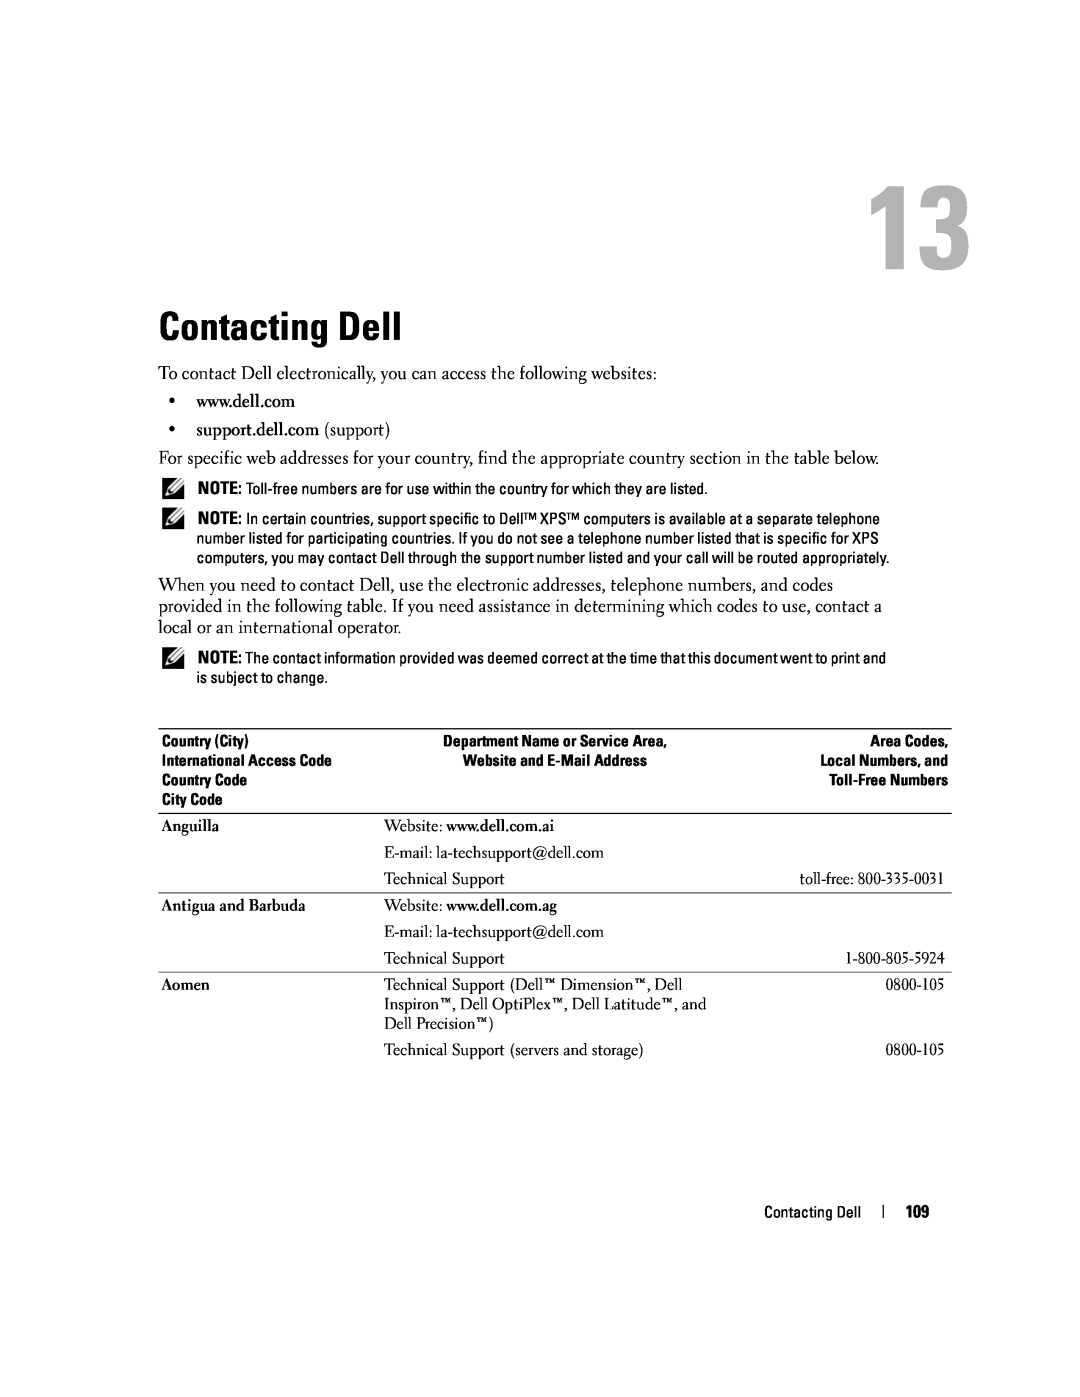 Dell 1501 owner manual Contacting Dell, support.dell.com support 